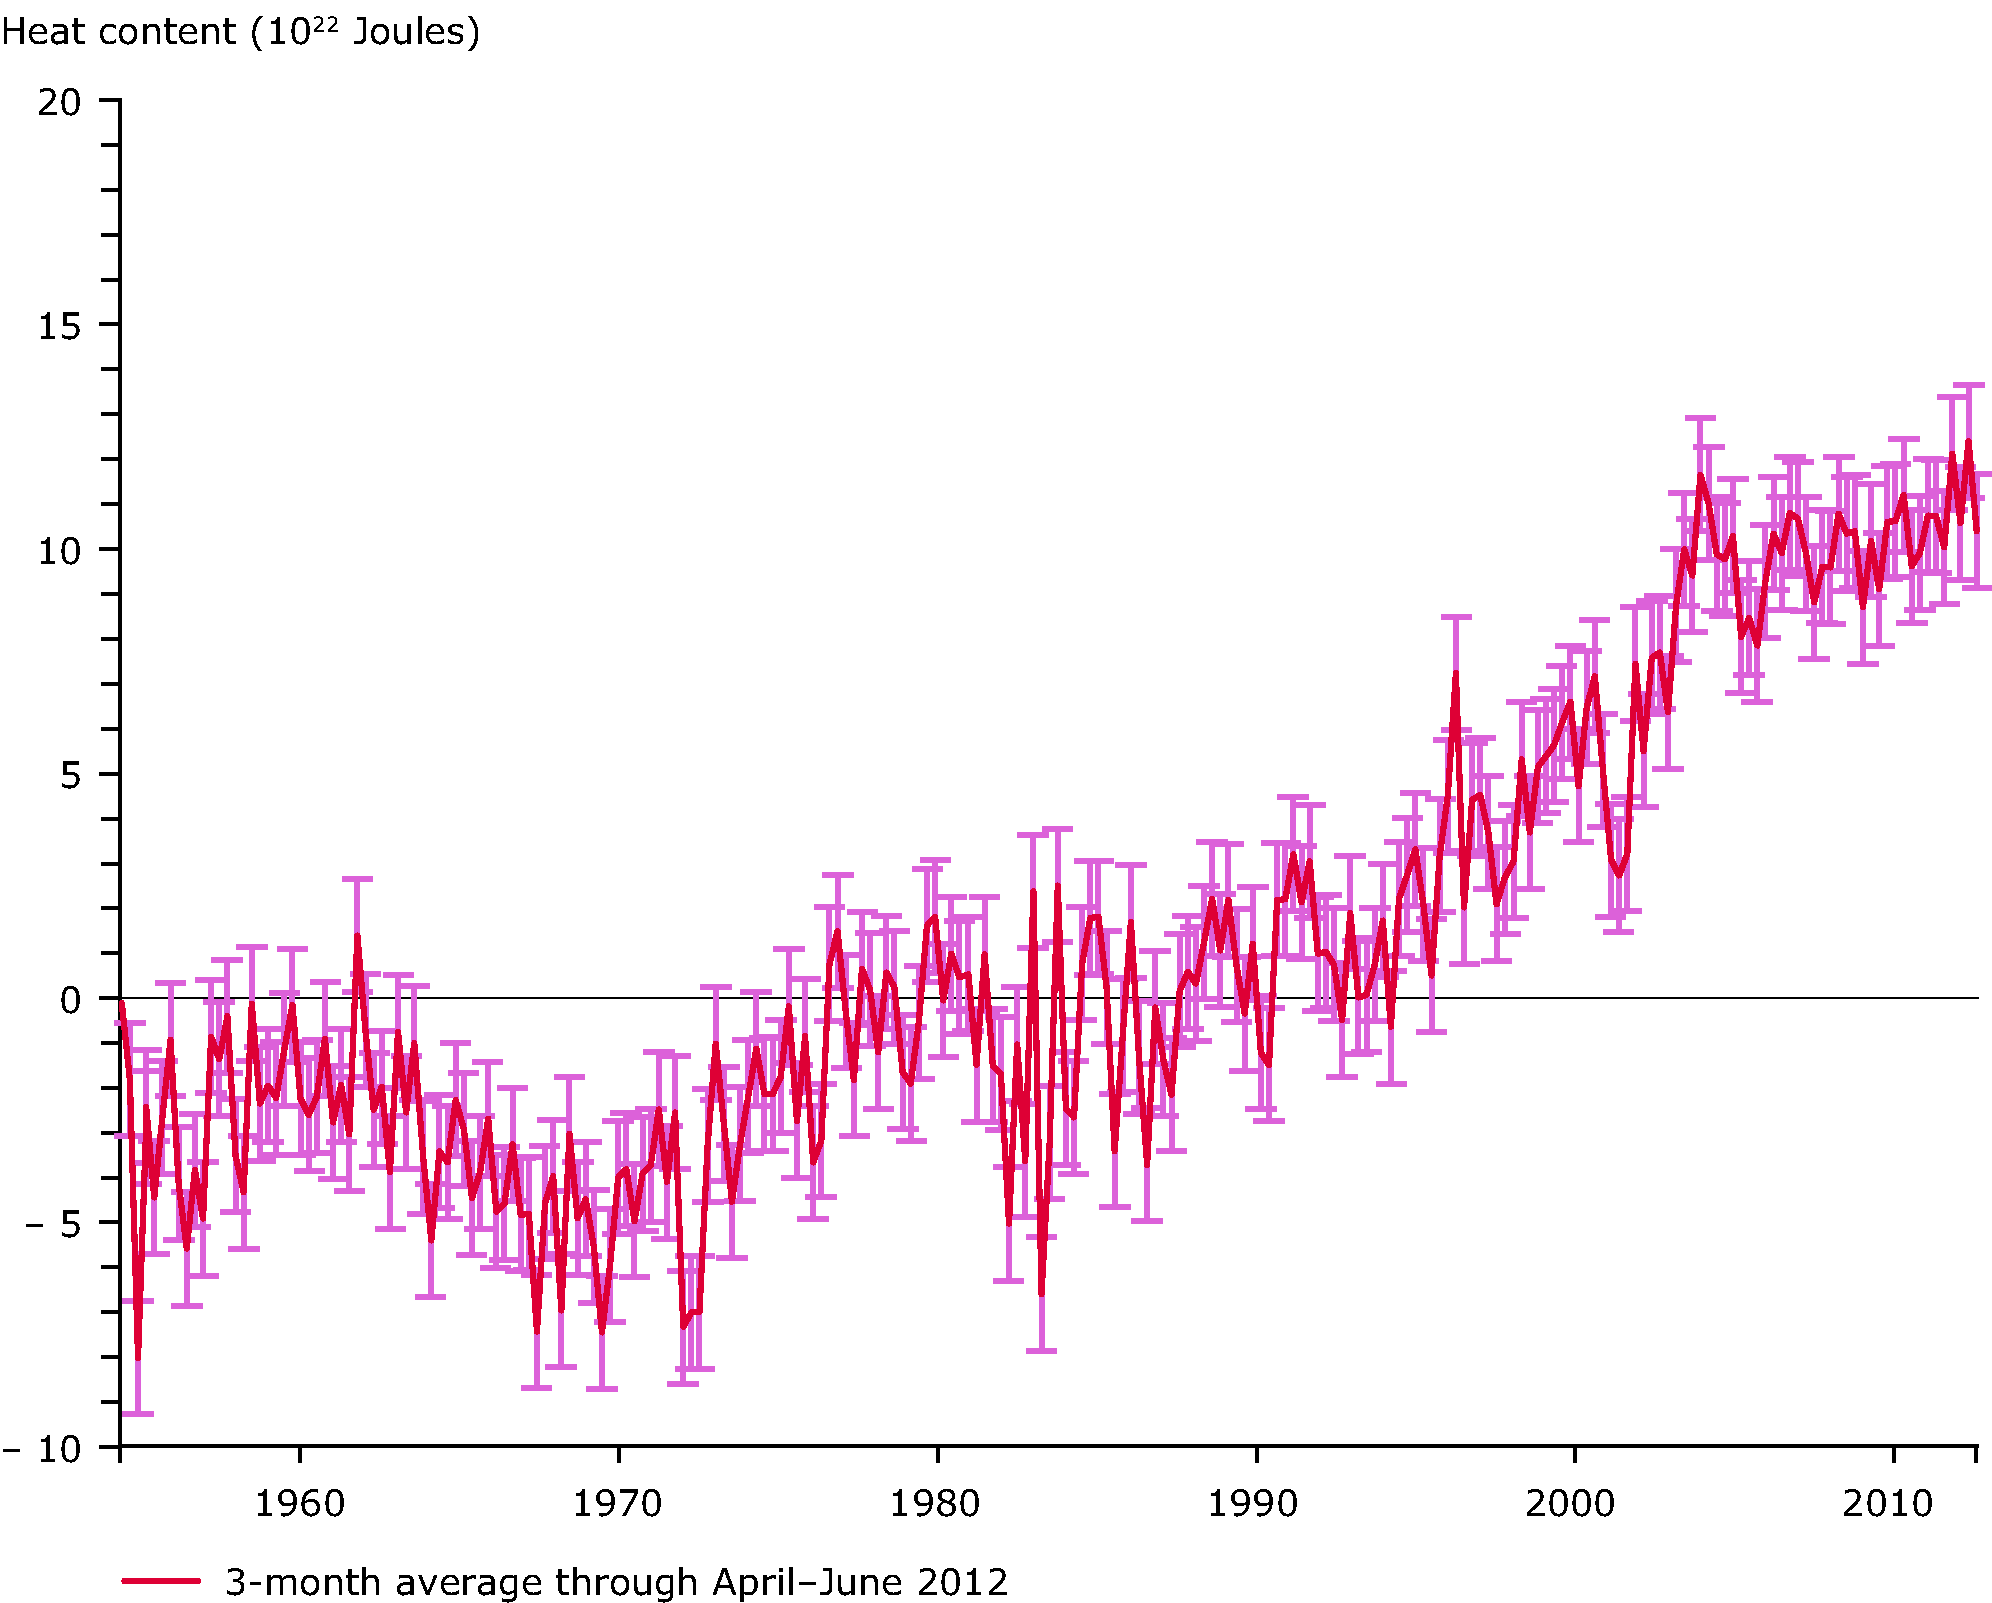 Ocean heat content calculated based on observations made in the upper 700 m of the water column 